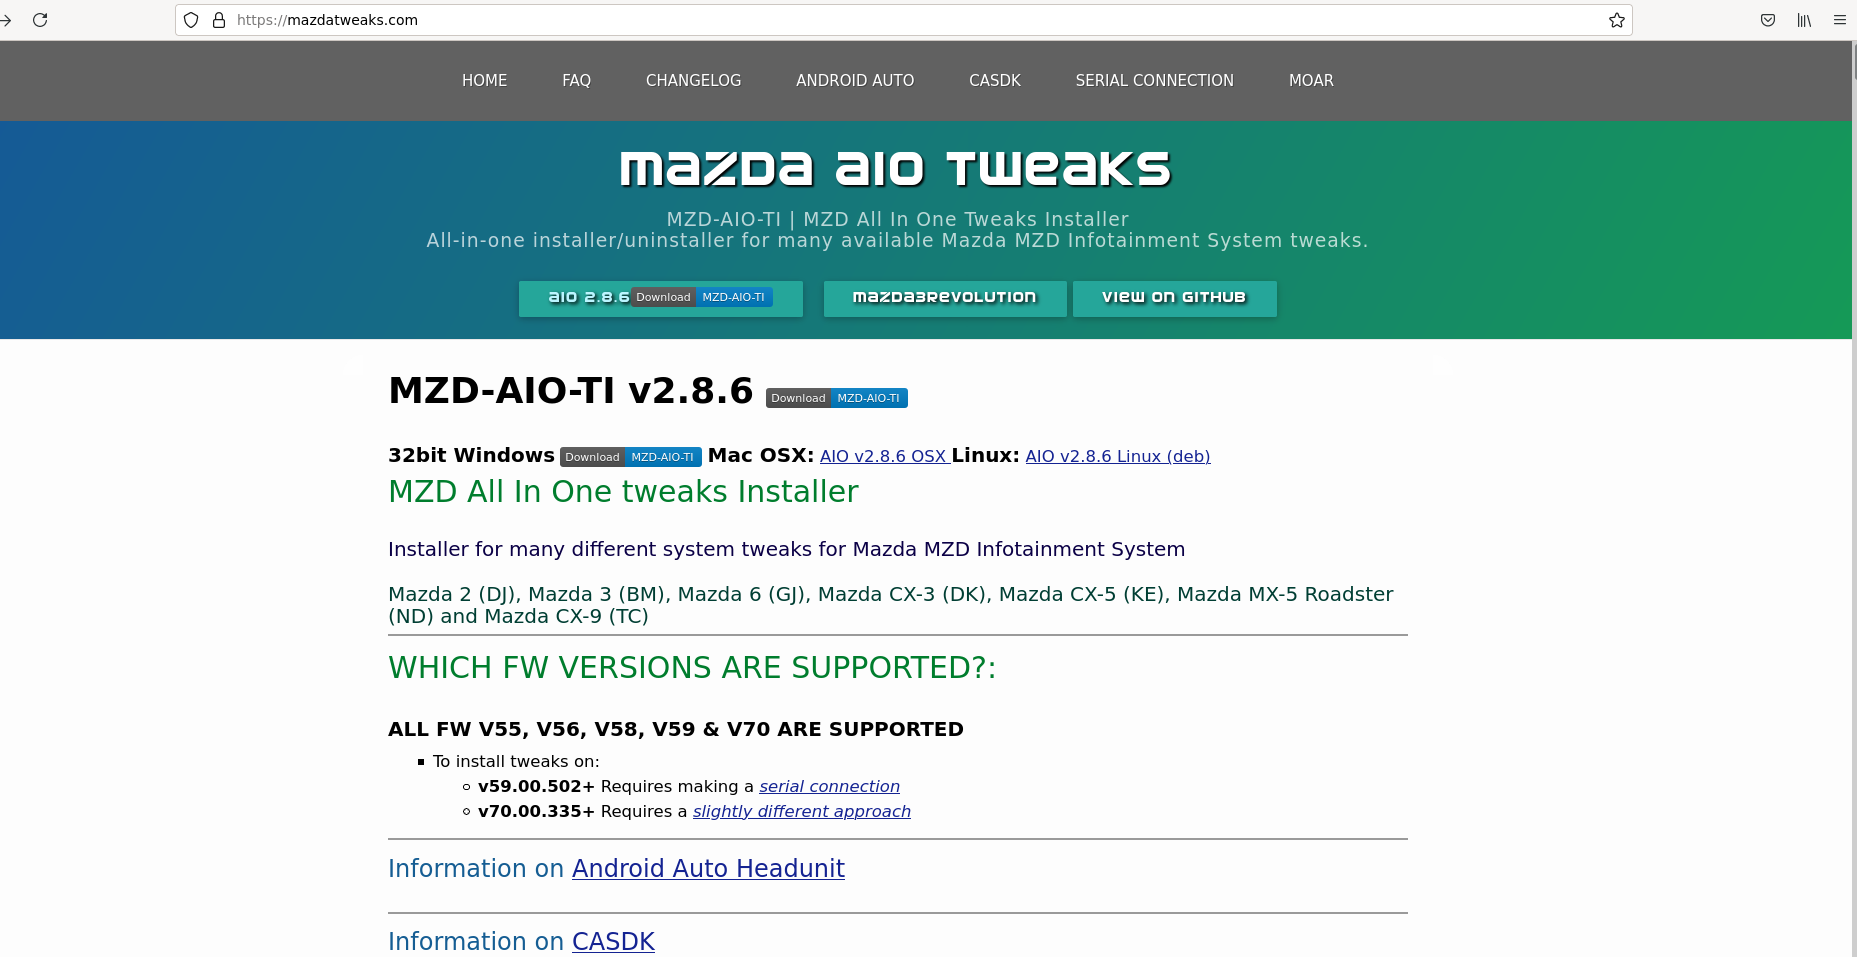 Landing page of the official Mazdatweaks AIO hack website